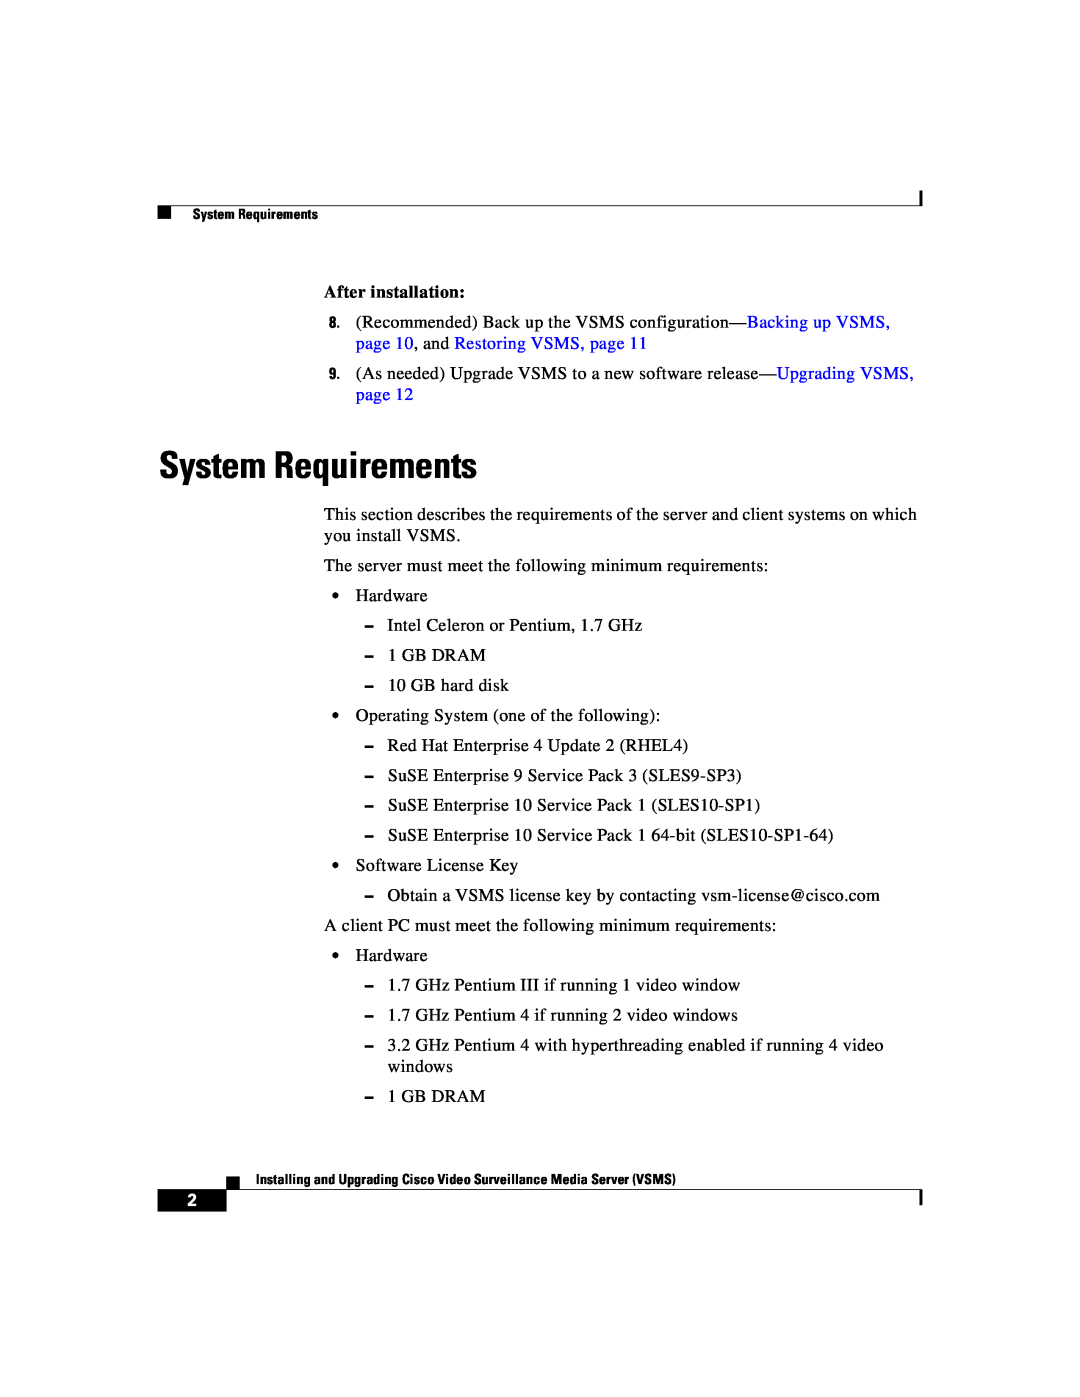 Cisco Systems Surveillance Media Server manual System Requirements, After installation 